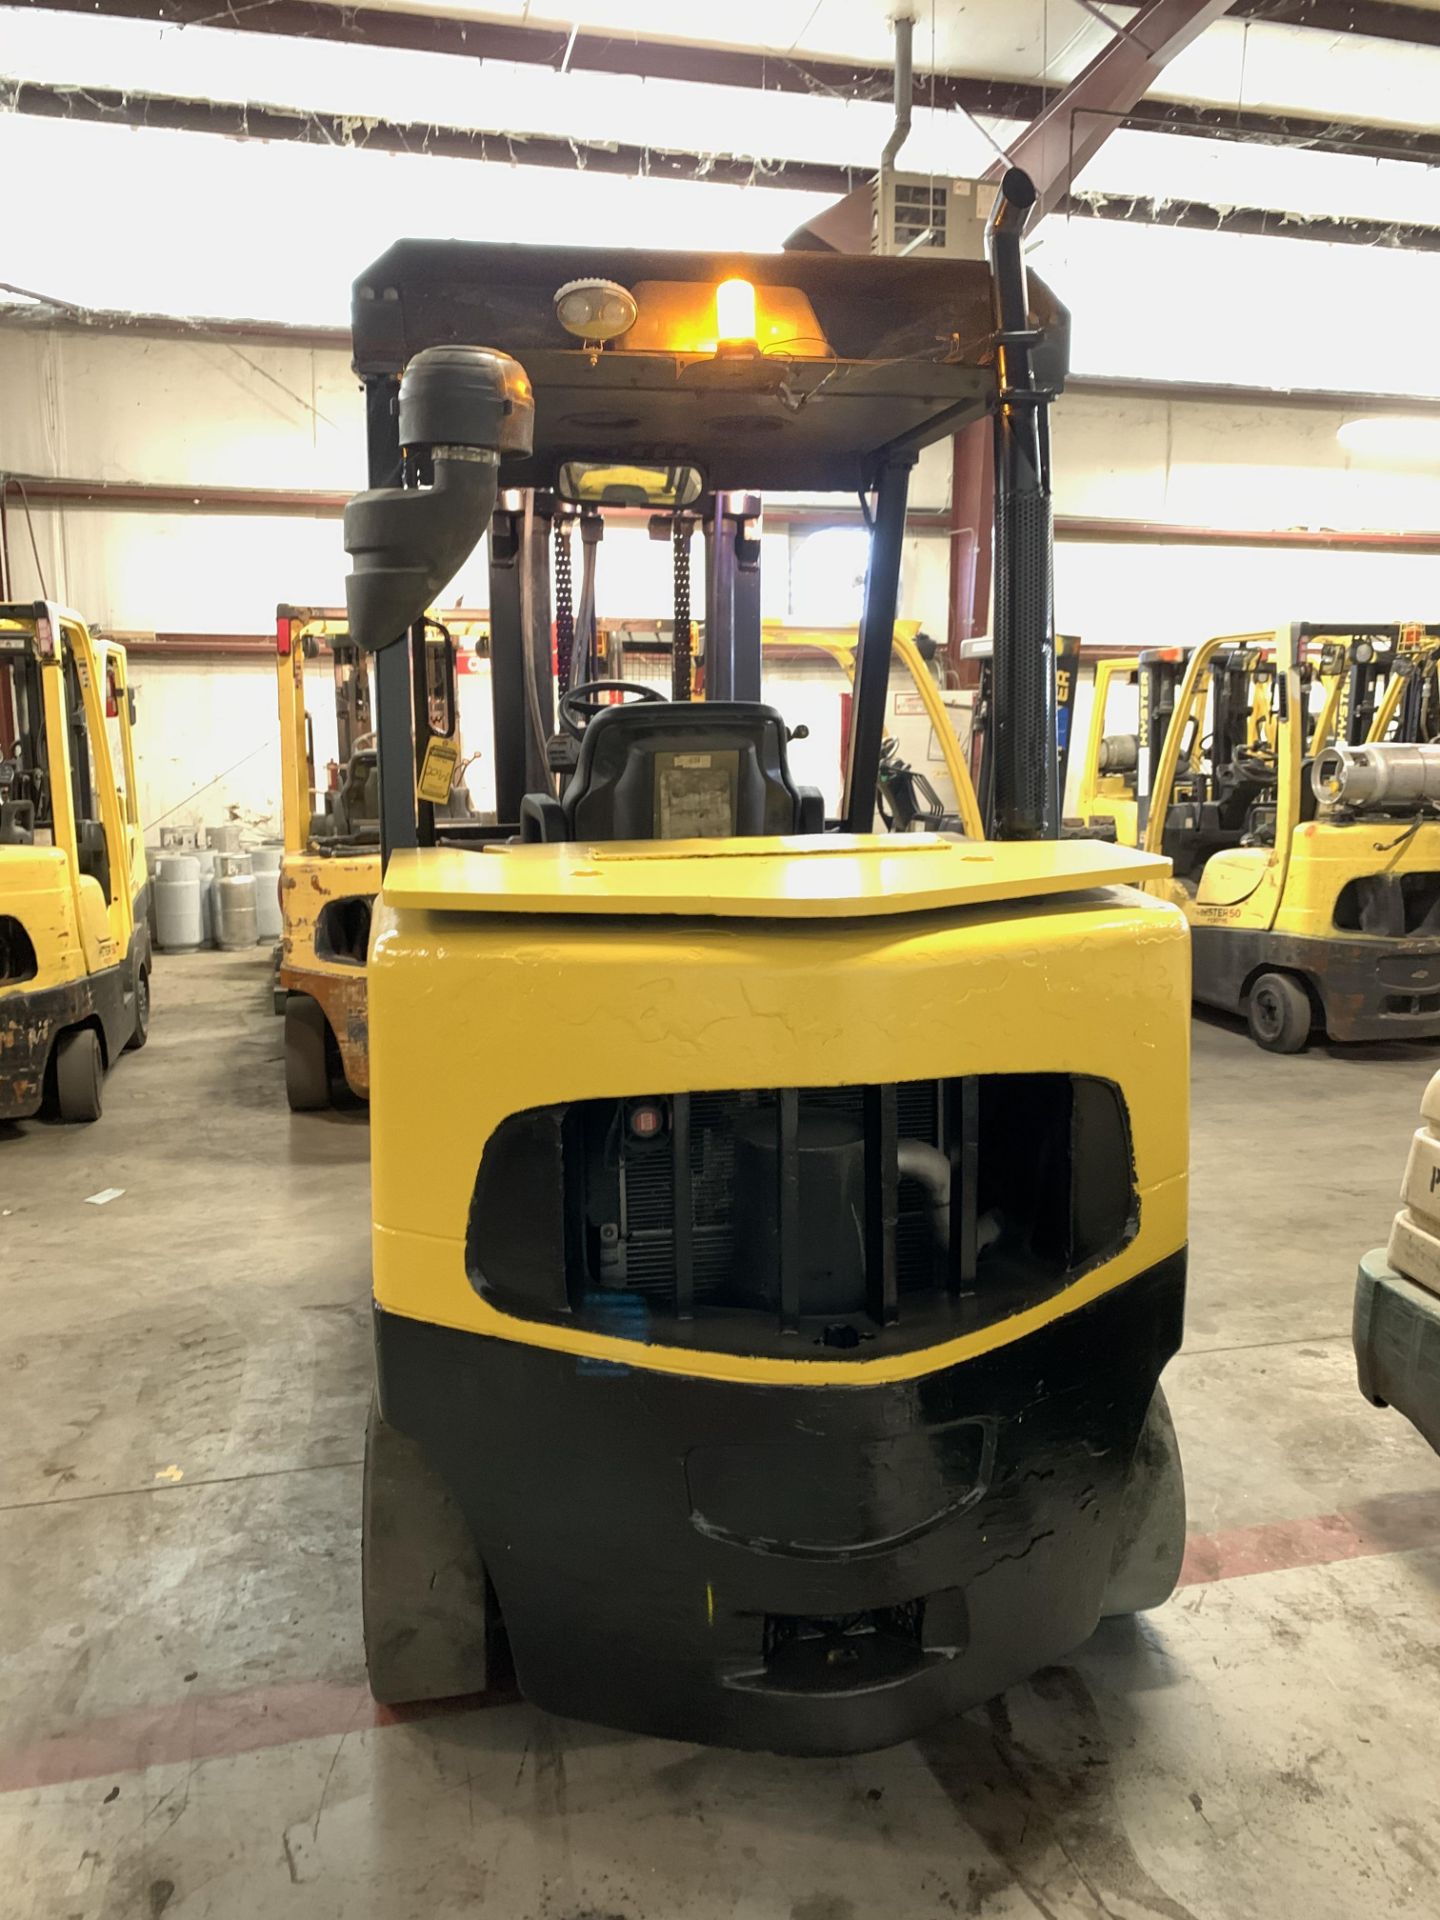 2013 HYSTER 15,500 LB. DIESEL FORKLIFT MODEL S155FT; SOLID TIRES; 2-STAGE MAST, 7811 HR (LOCATED OH) - Image 2 of 5